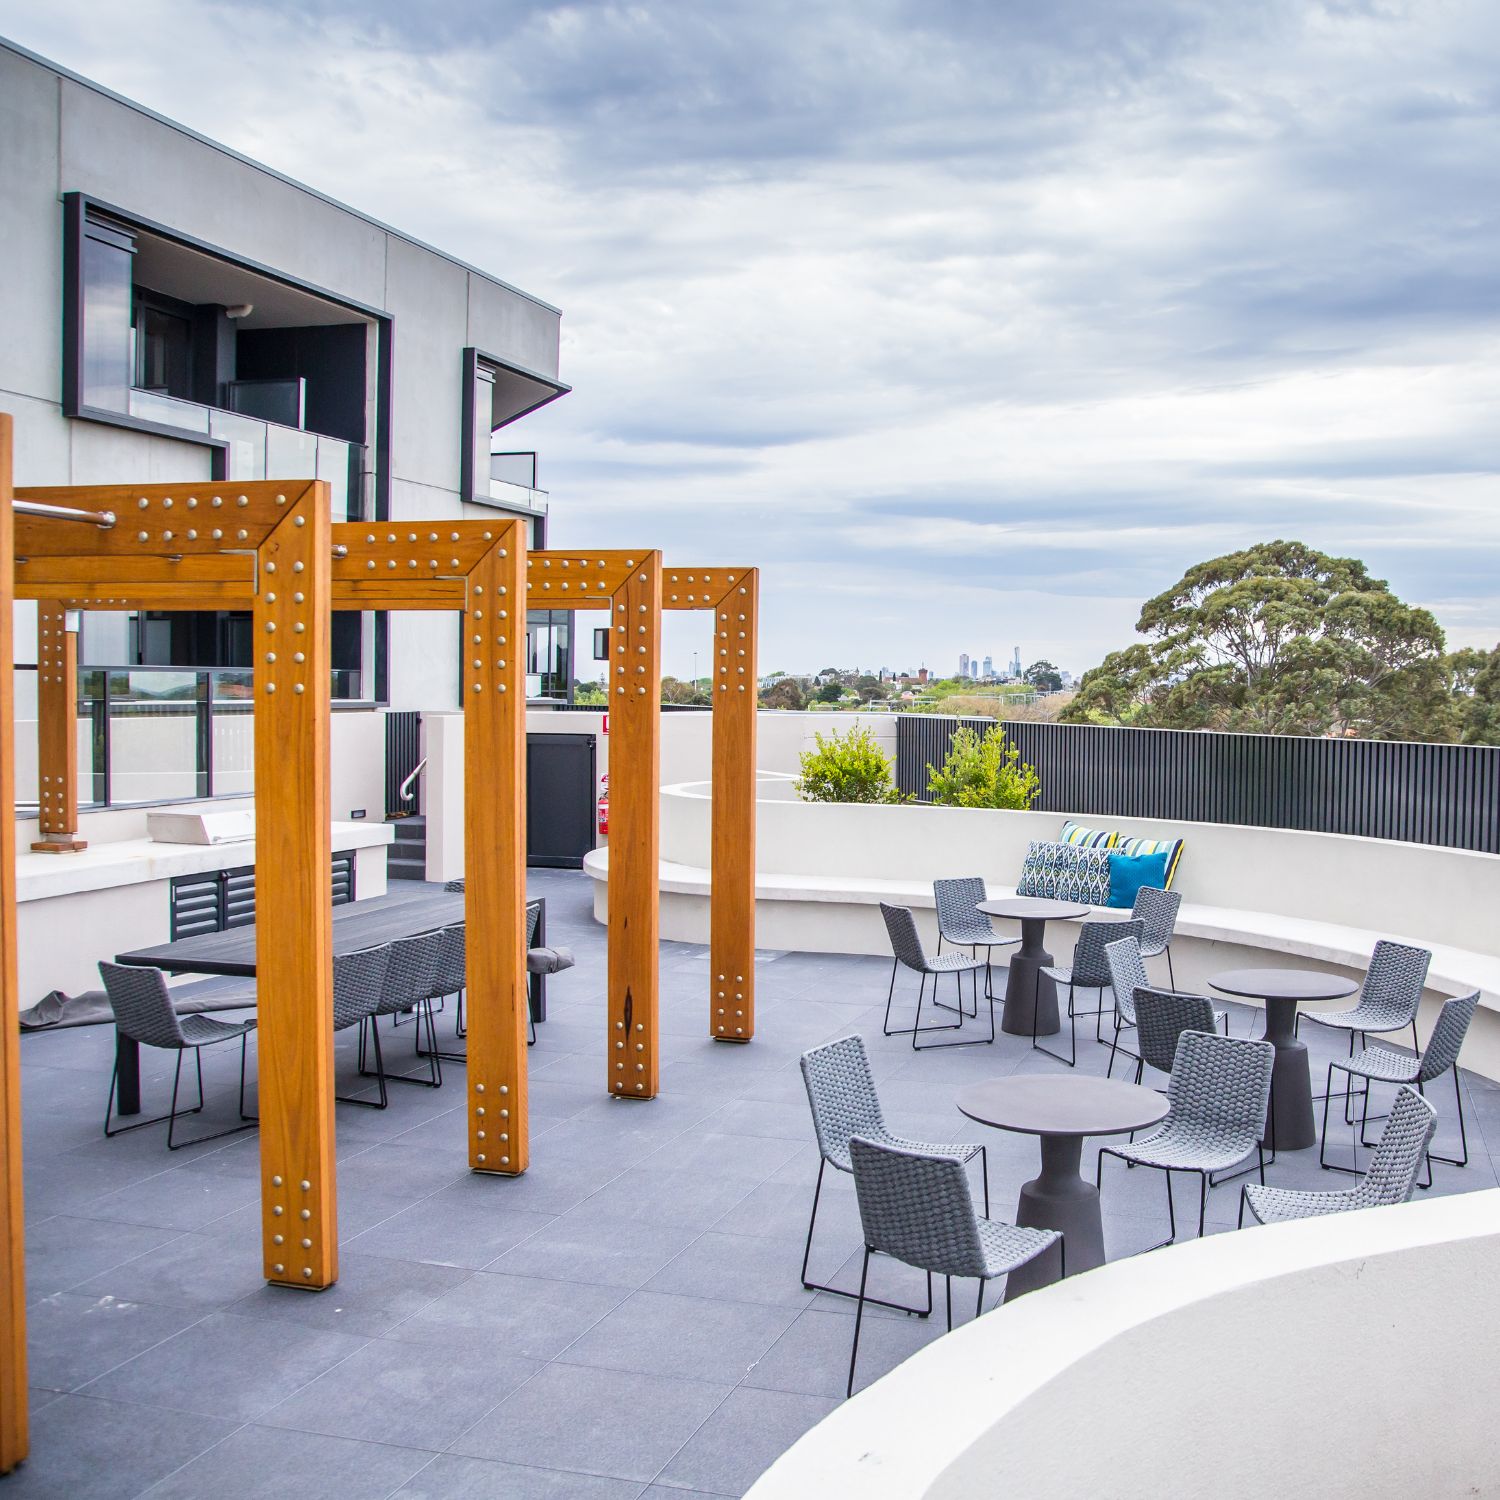 Sebel Malvern Melbourne Rooftop Terrace and BBQ area